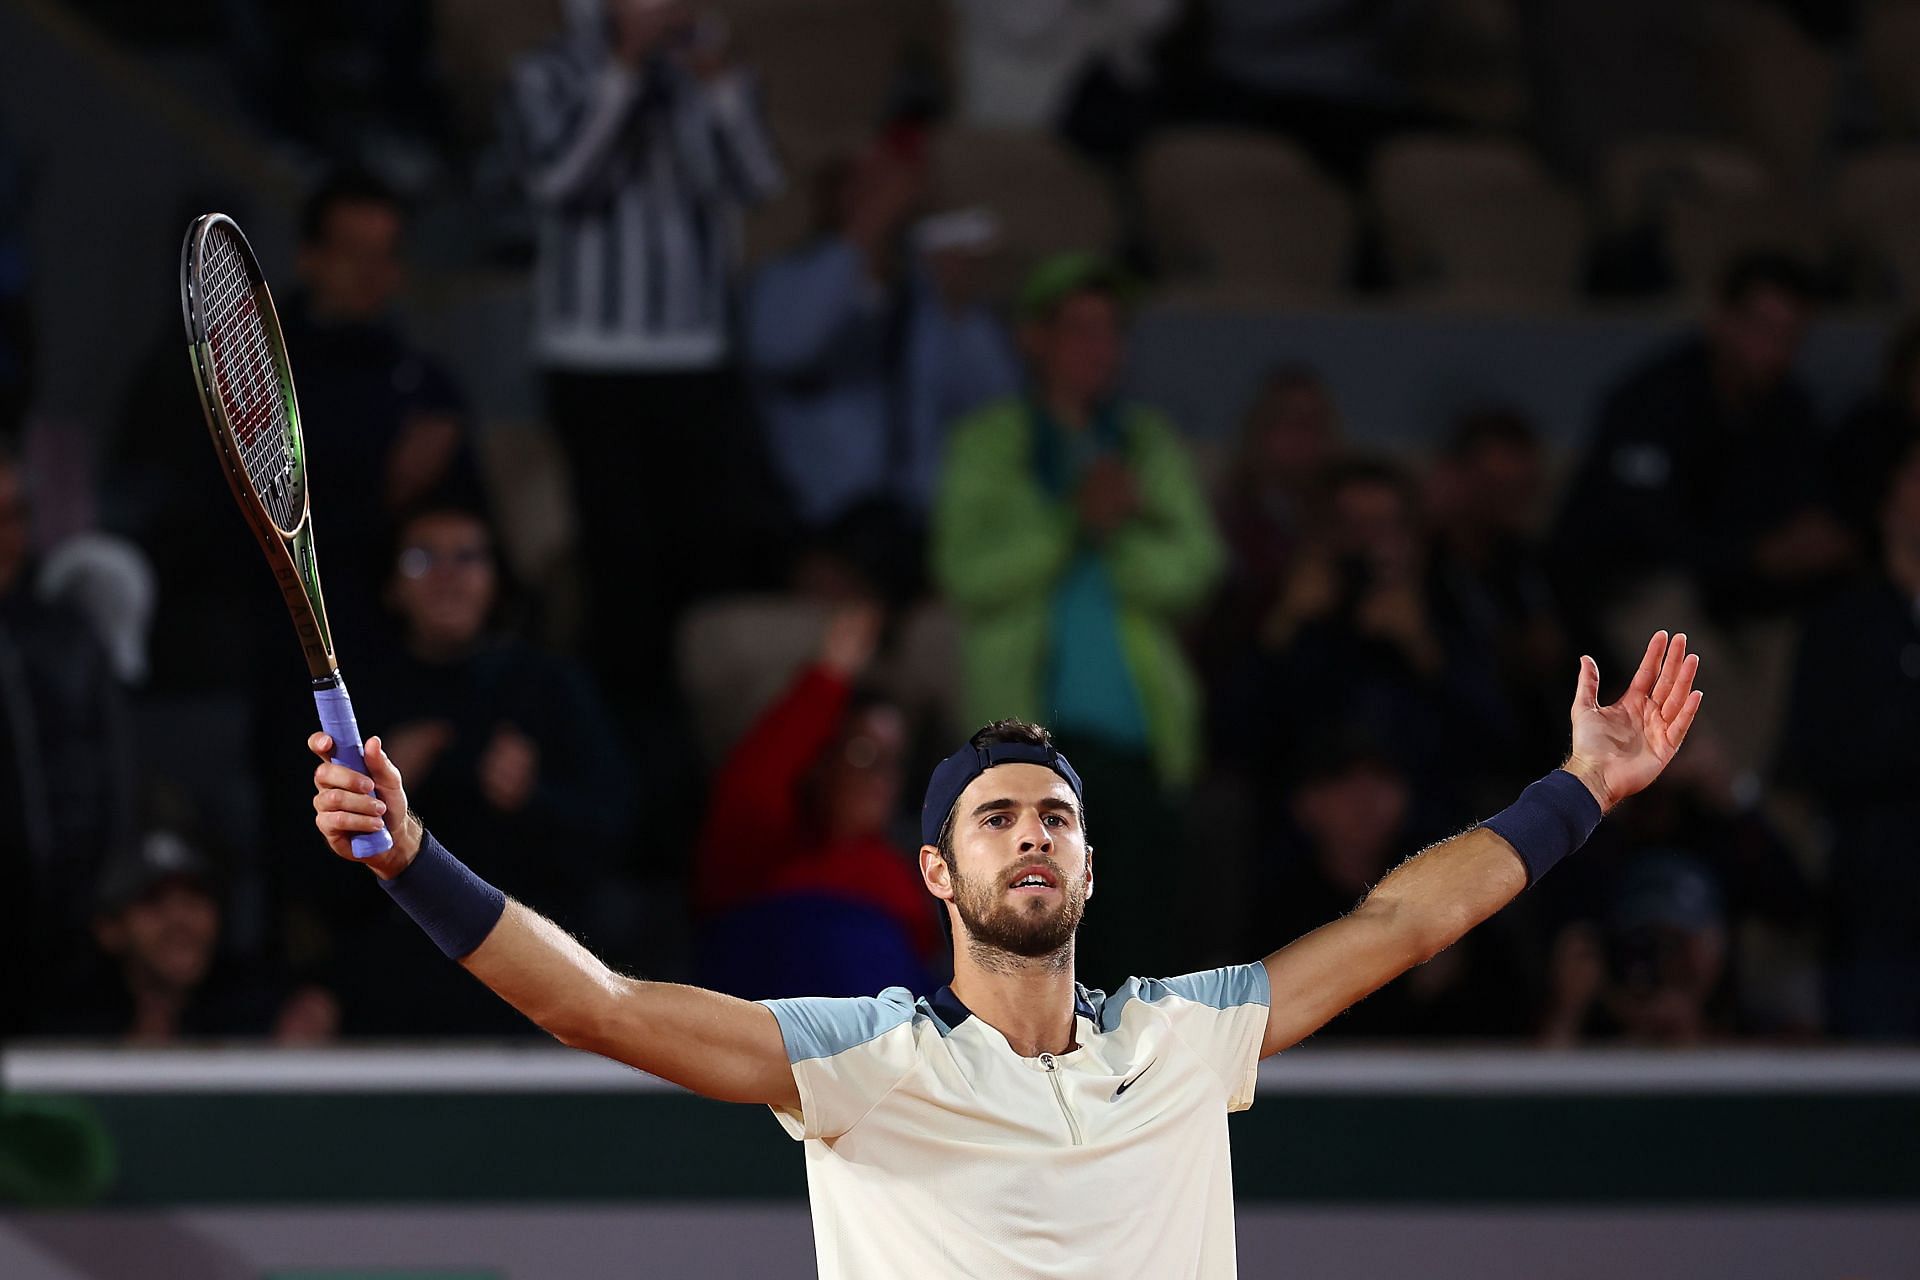 Khachanov beat Cameron Norrie in his last match at the 2022 French Open.